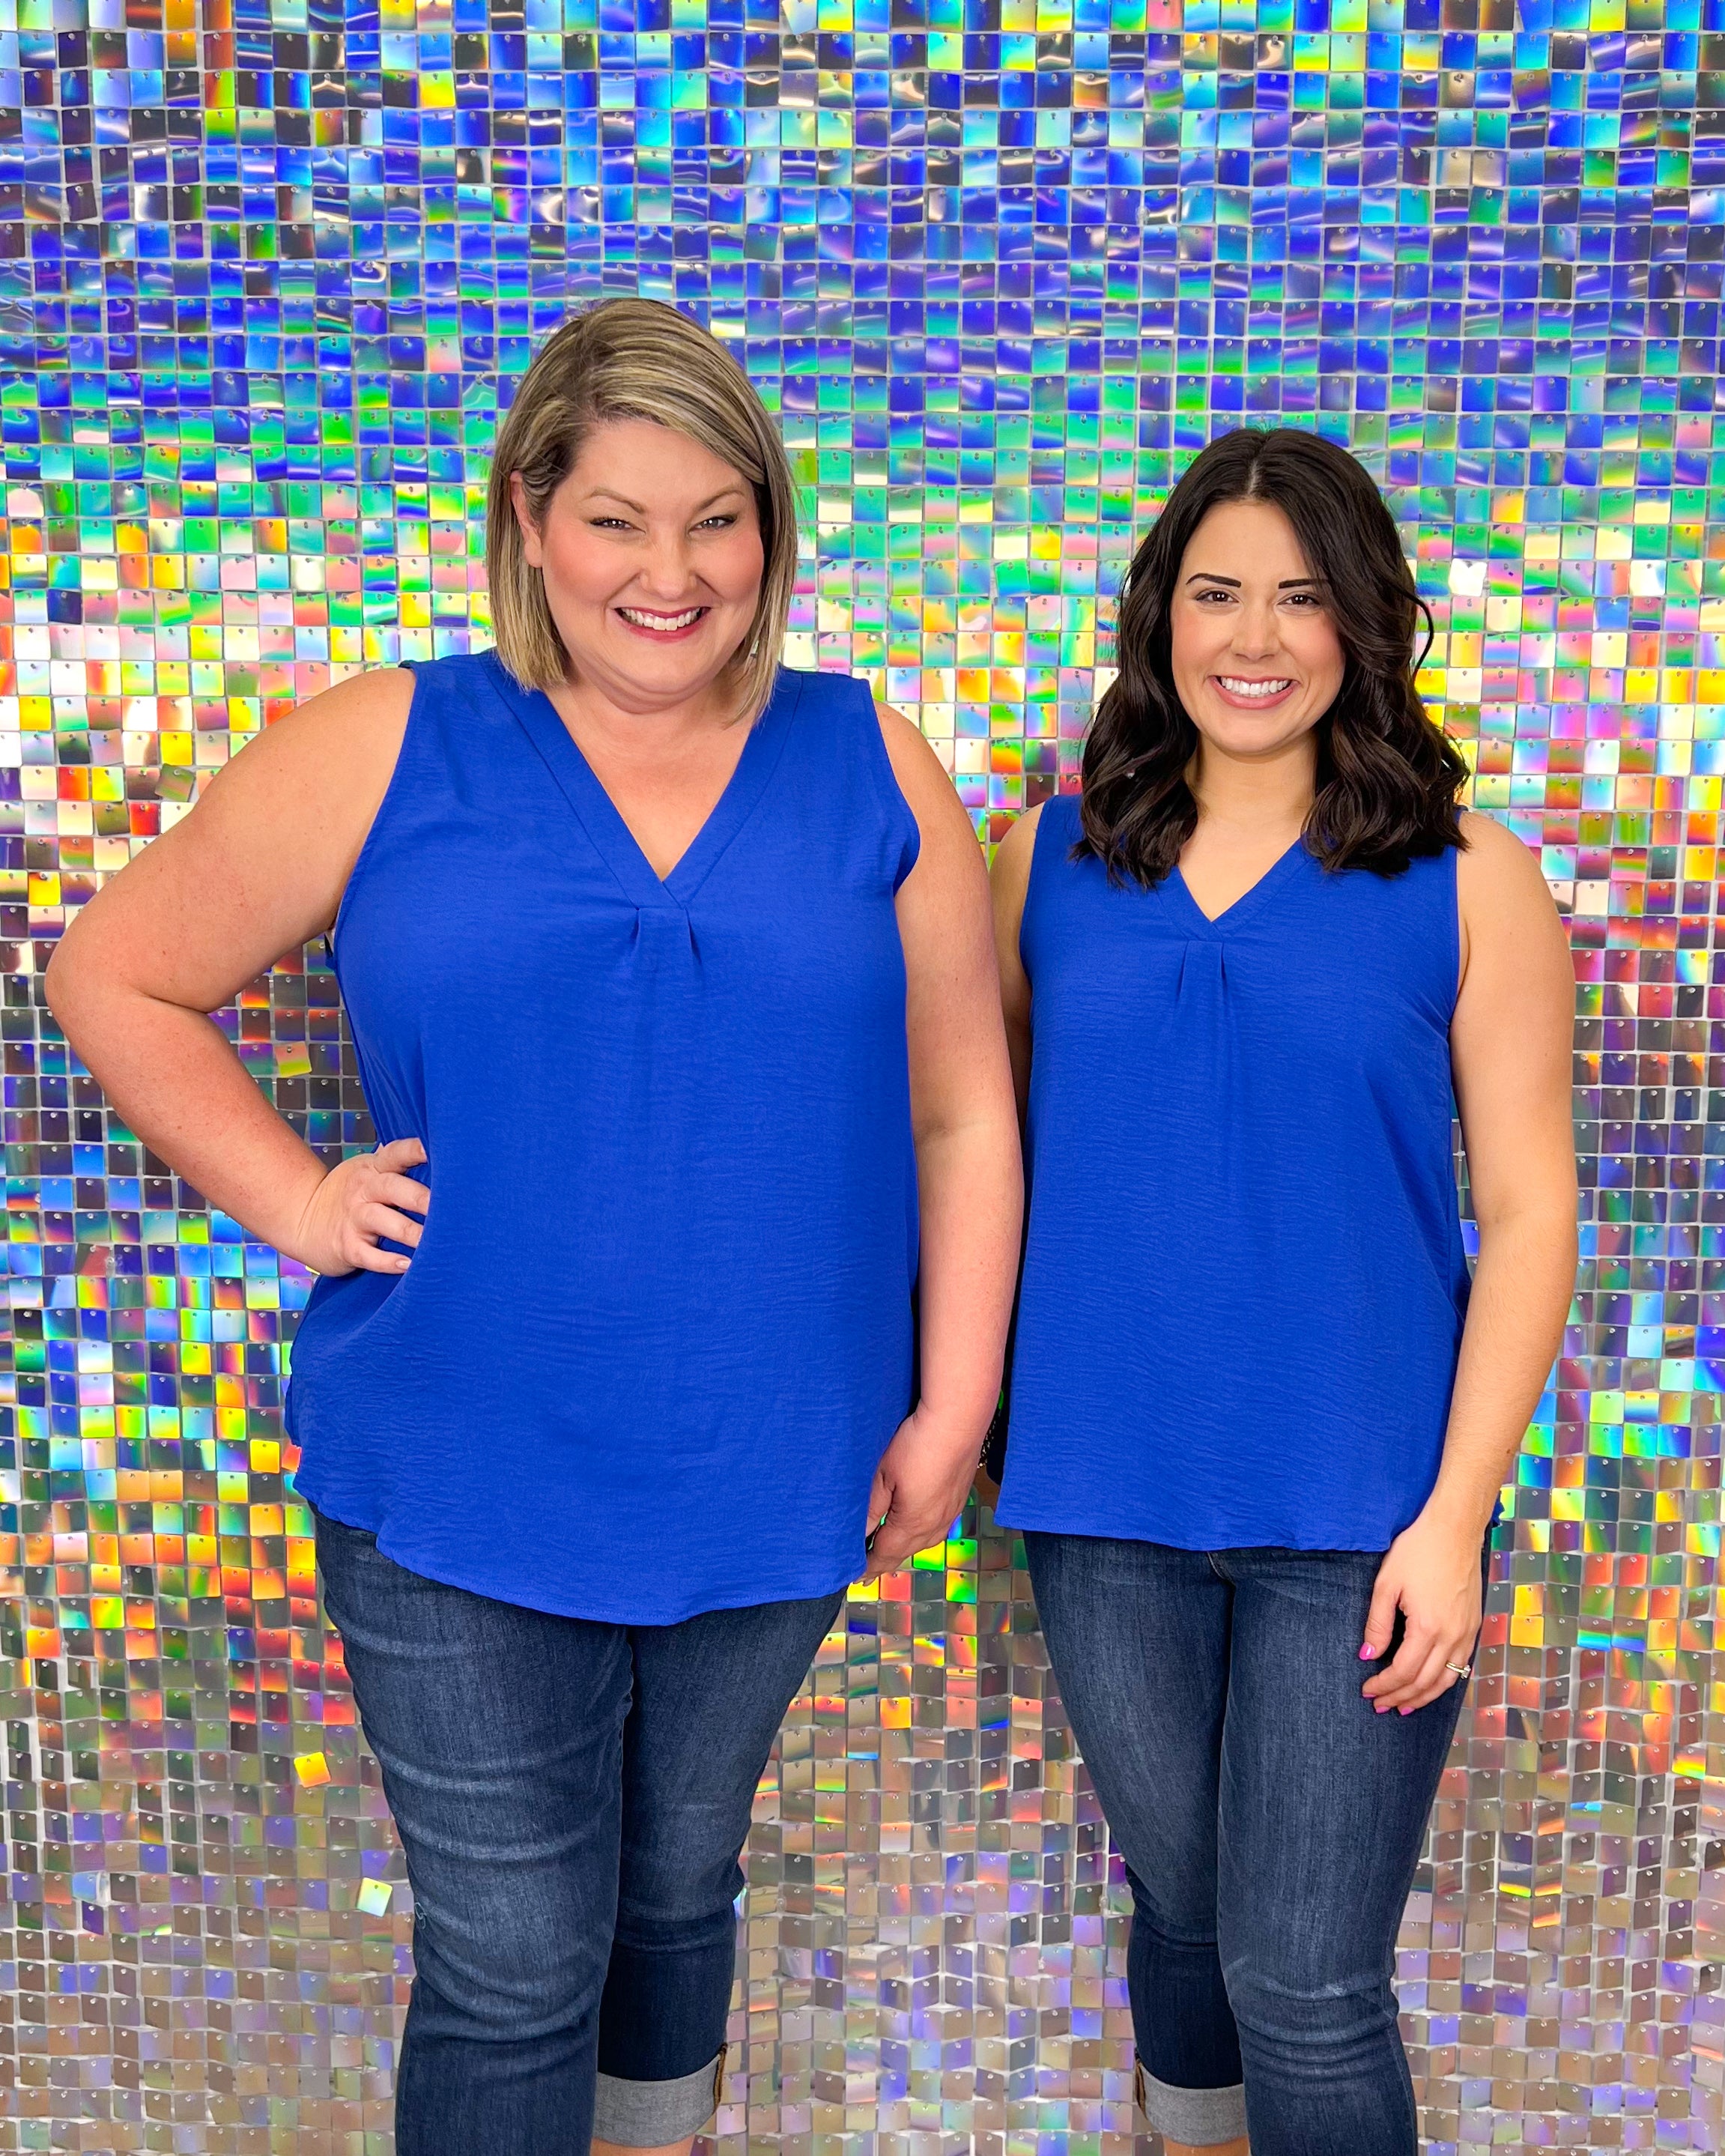 Andree By Unit Superstar Top - Royal Blue, v-neck, sleeveless, airflow, plus size